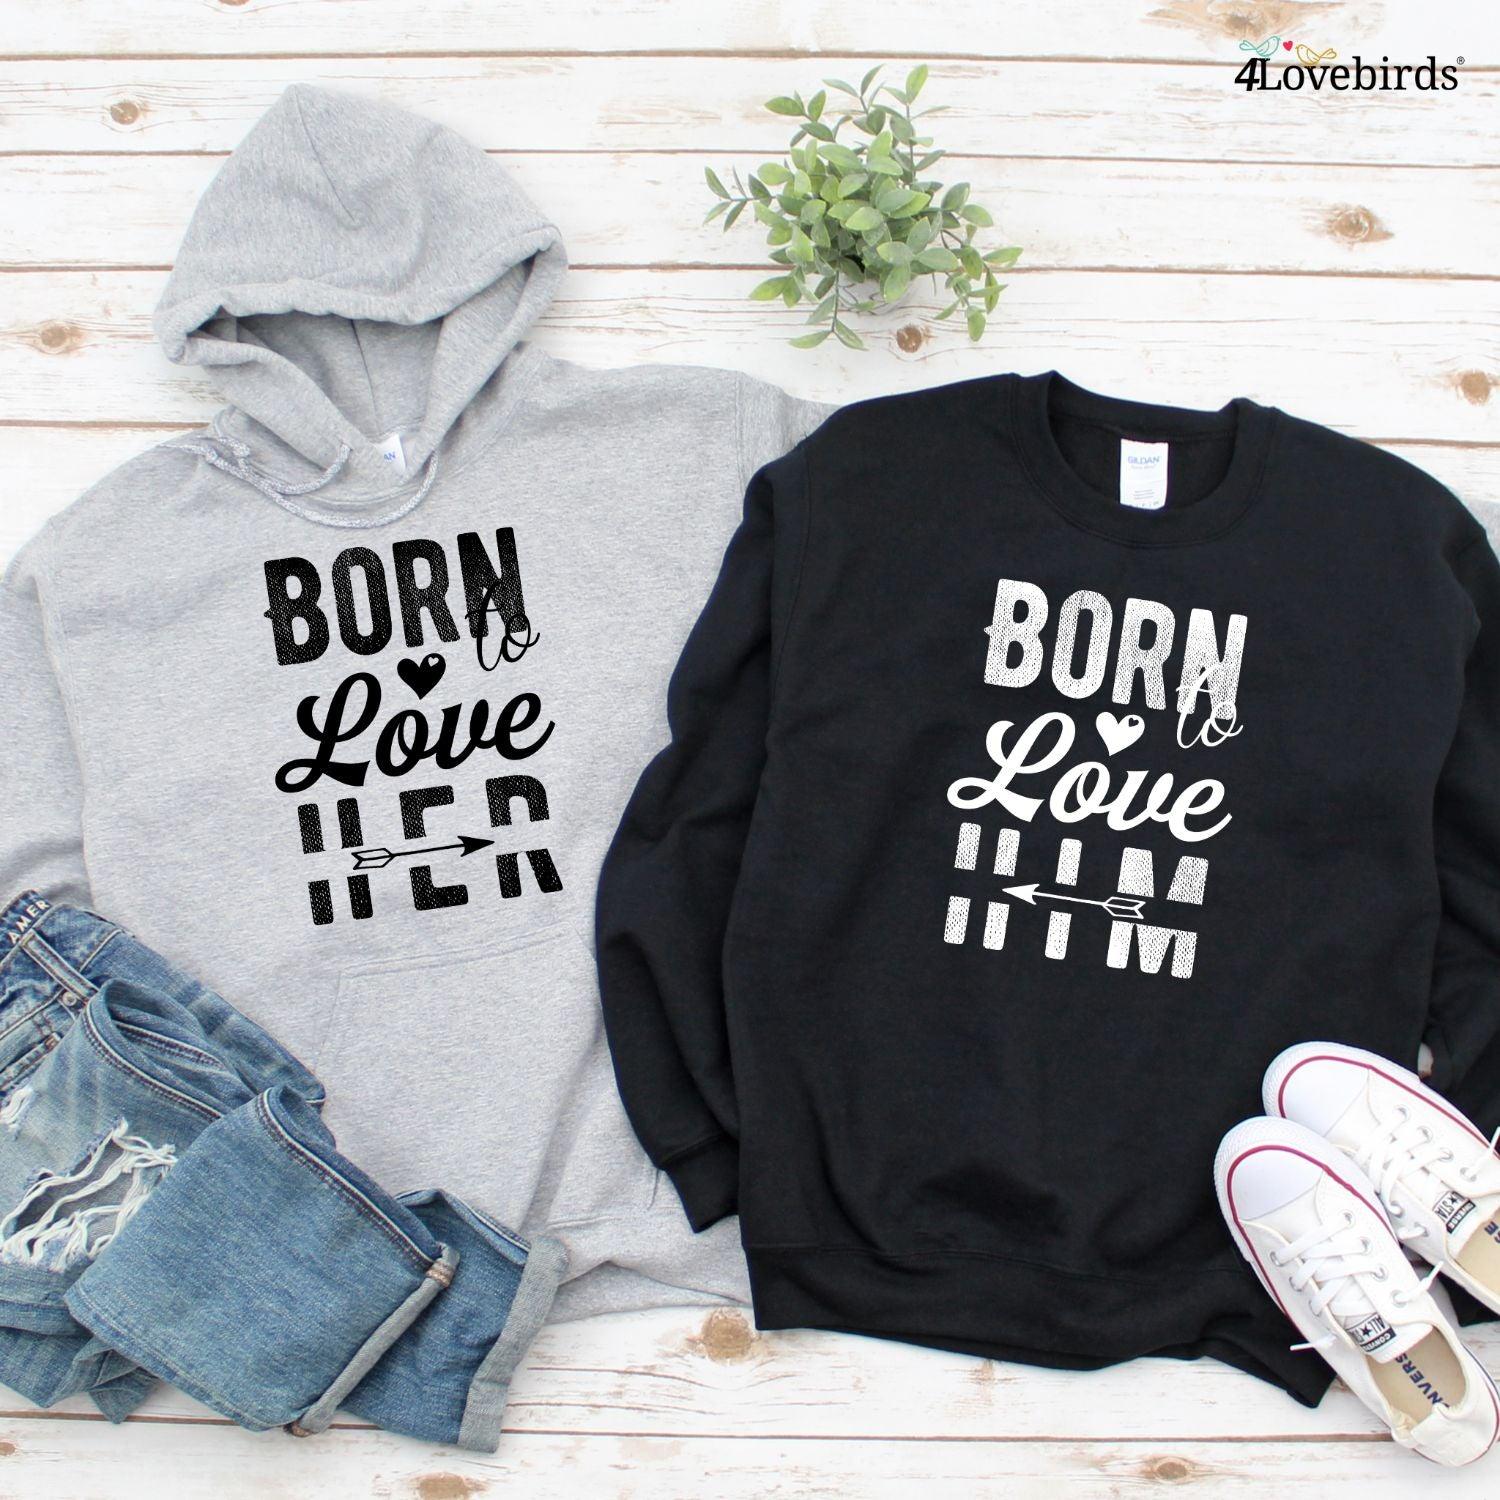 Matching Set Outfits: 'Born to Love Him/Her' - Chic and Cozy Couple Attire - 4Lovebirds